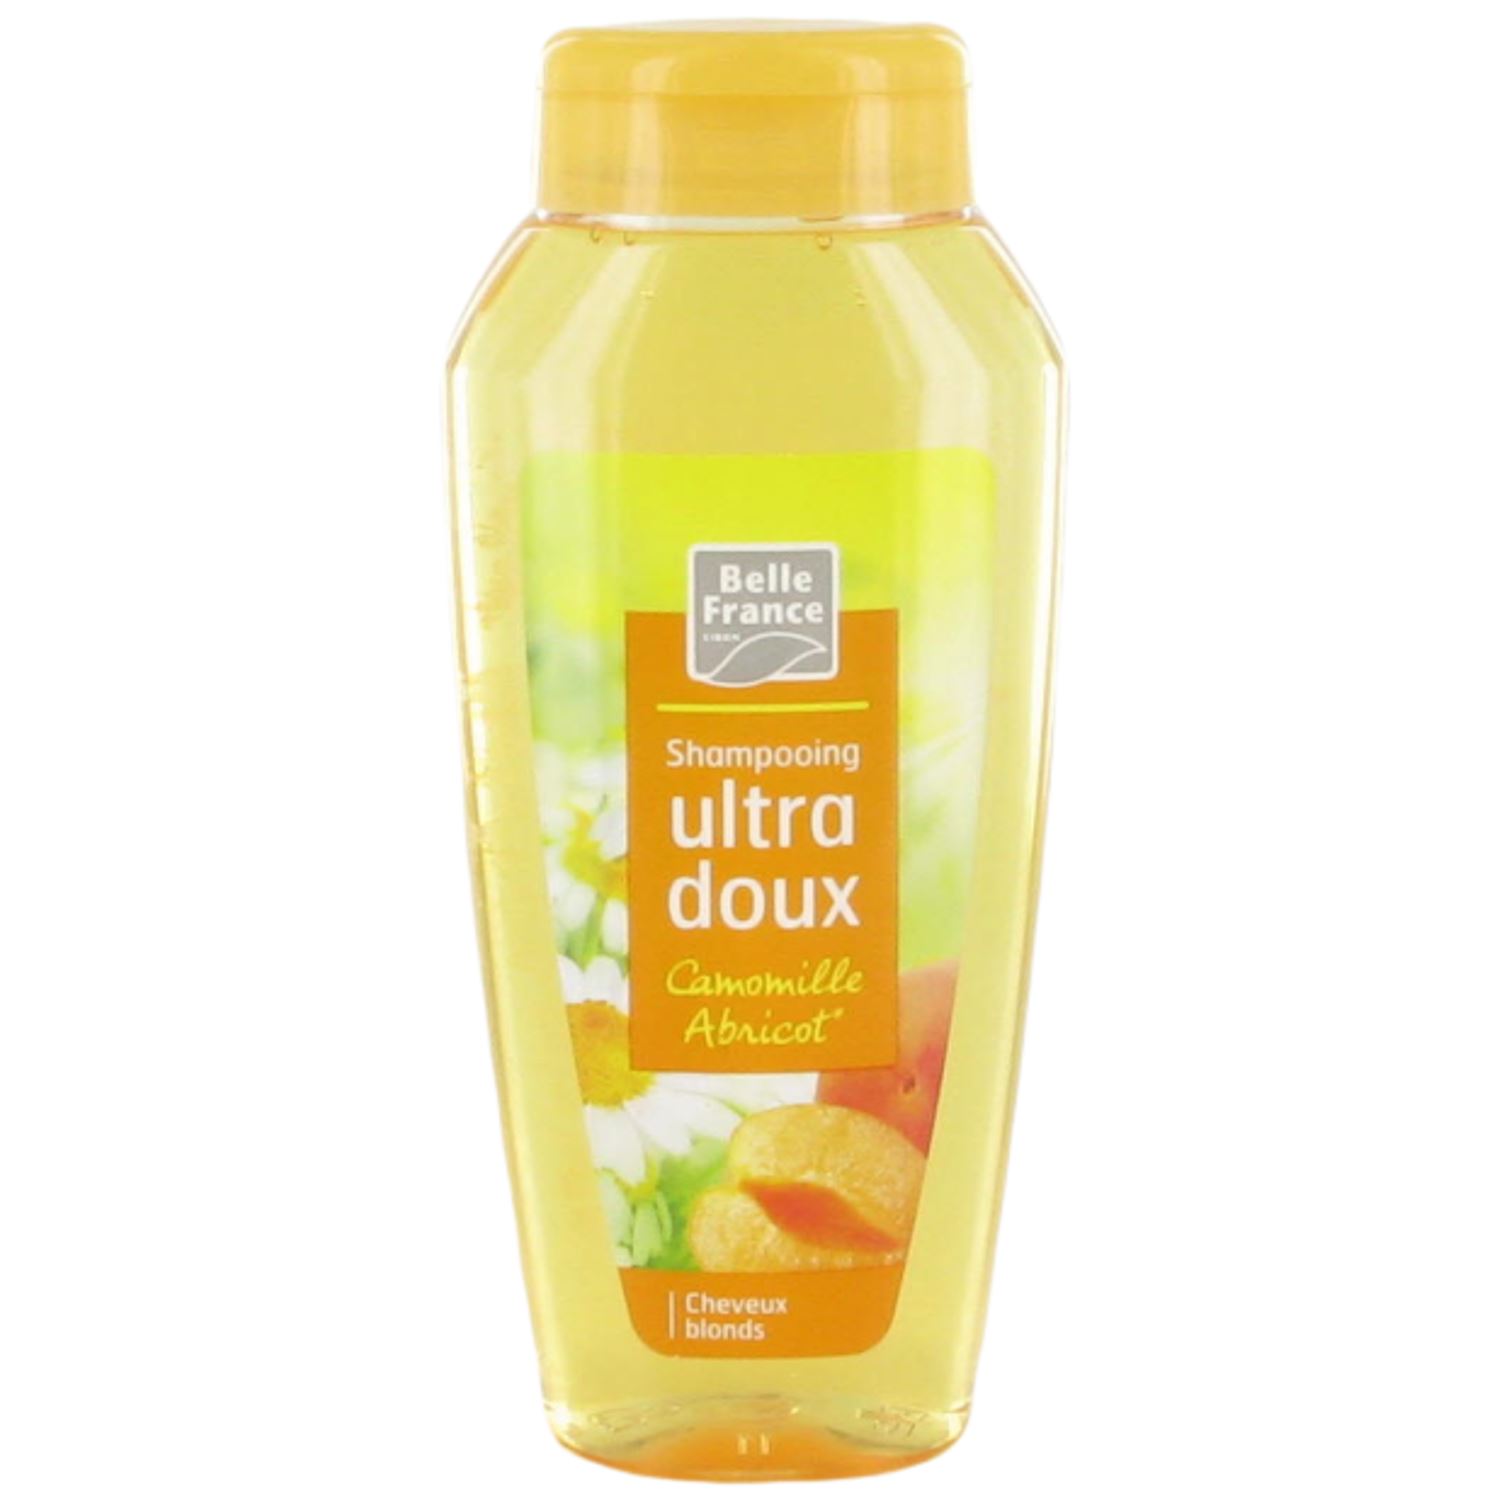 Shampooing extra doux camomille abricot